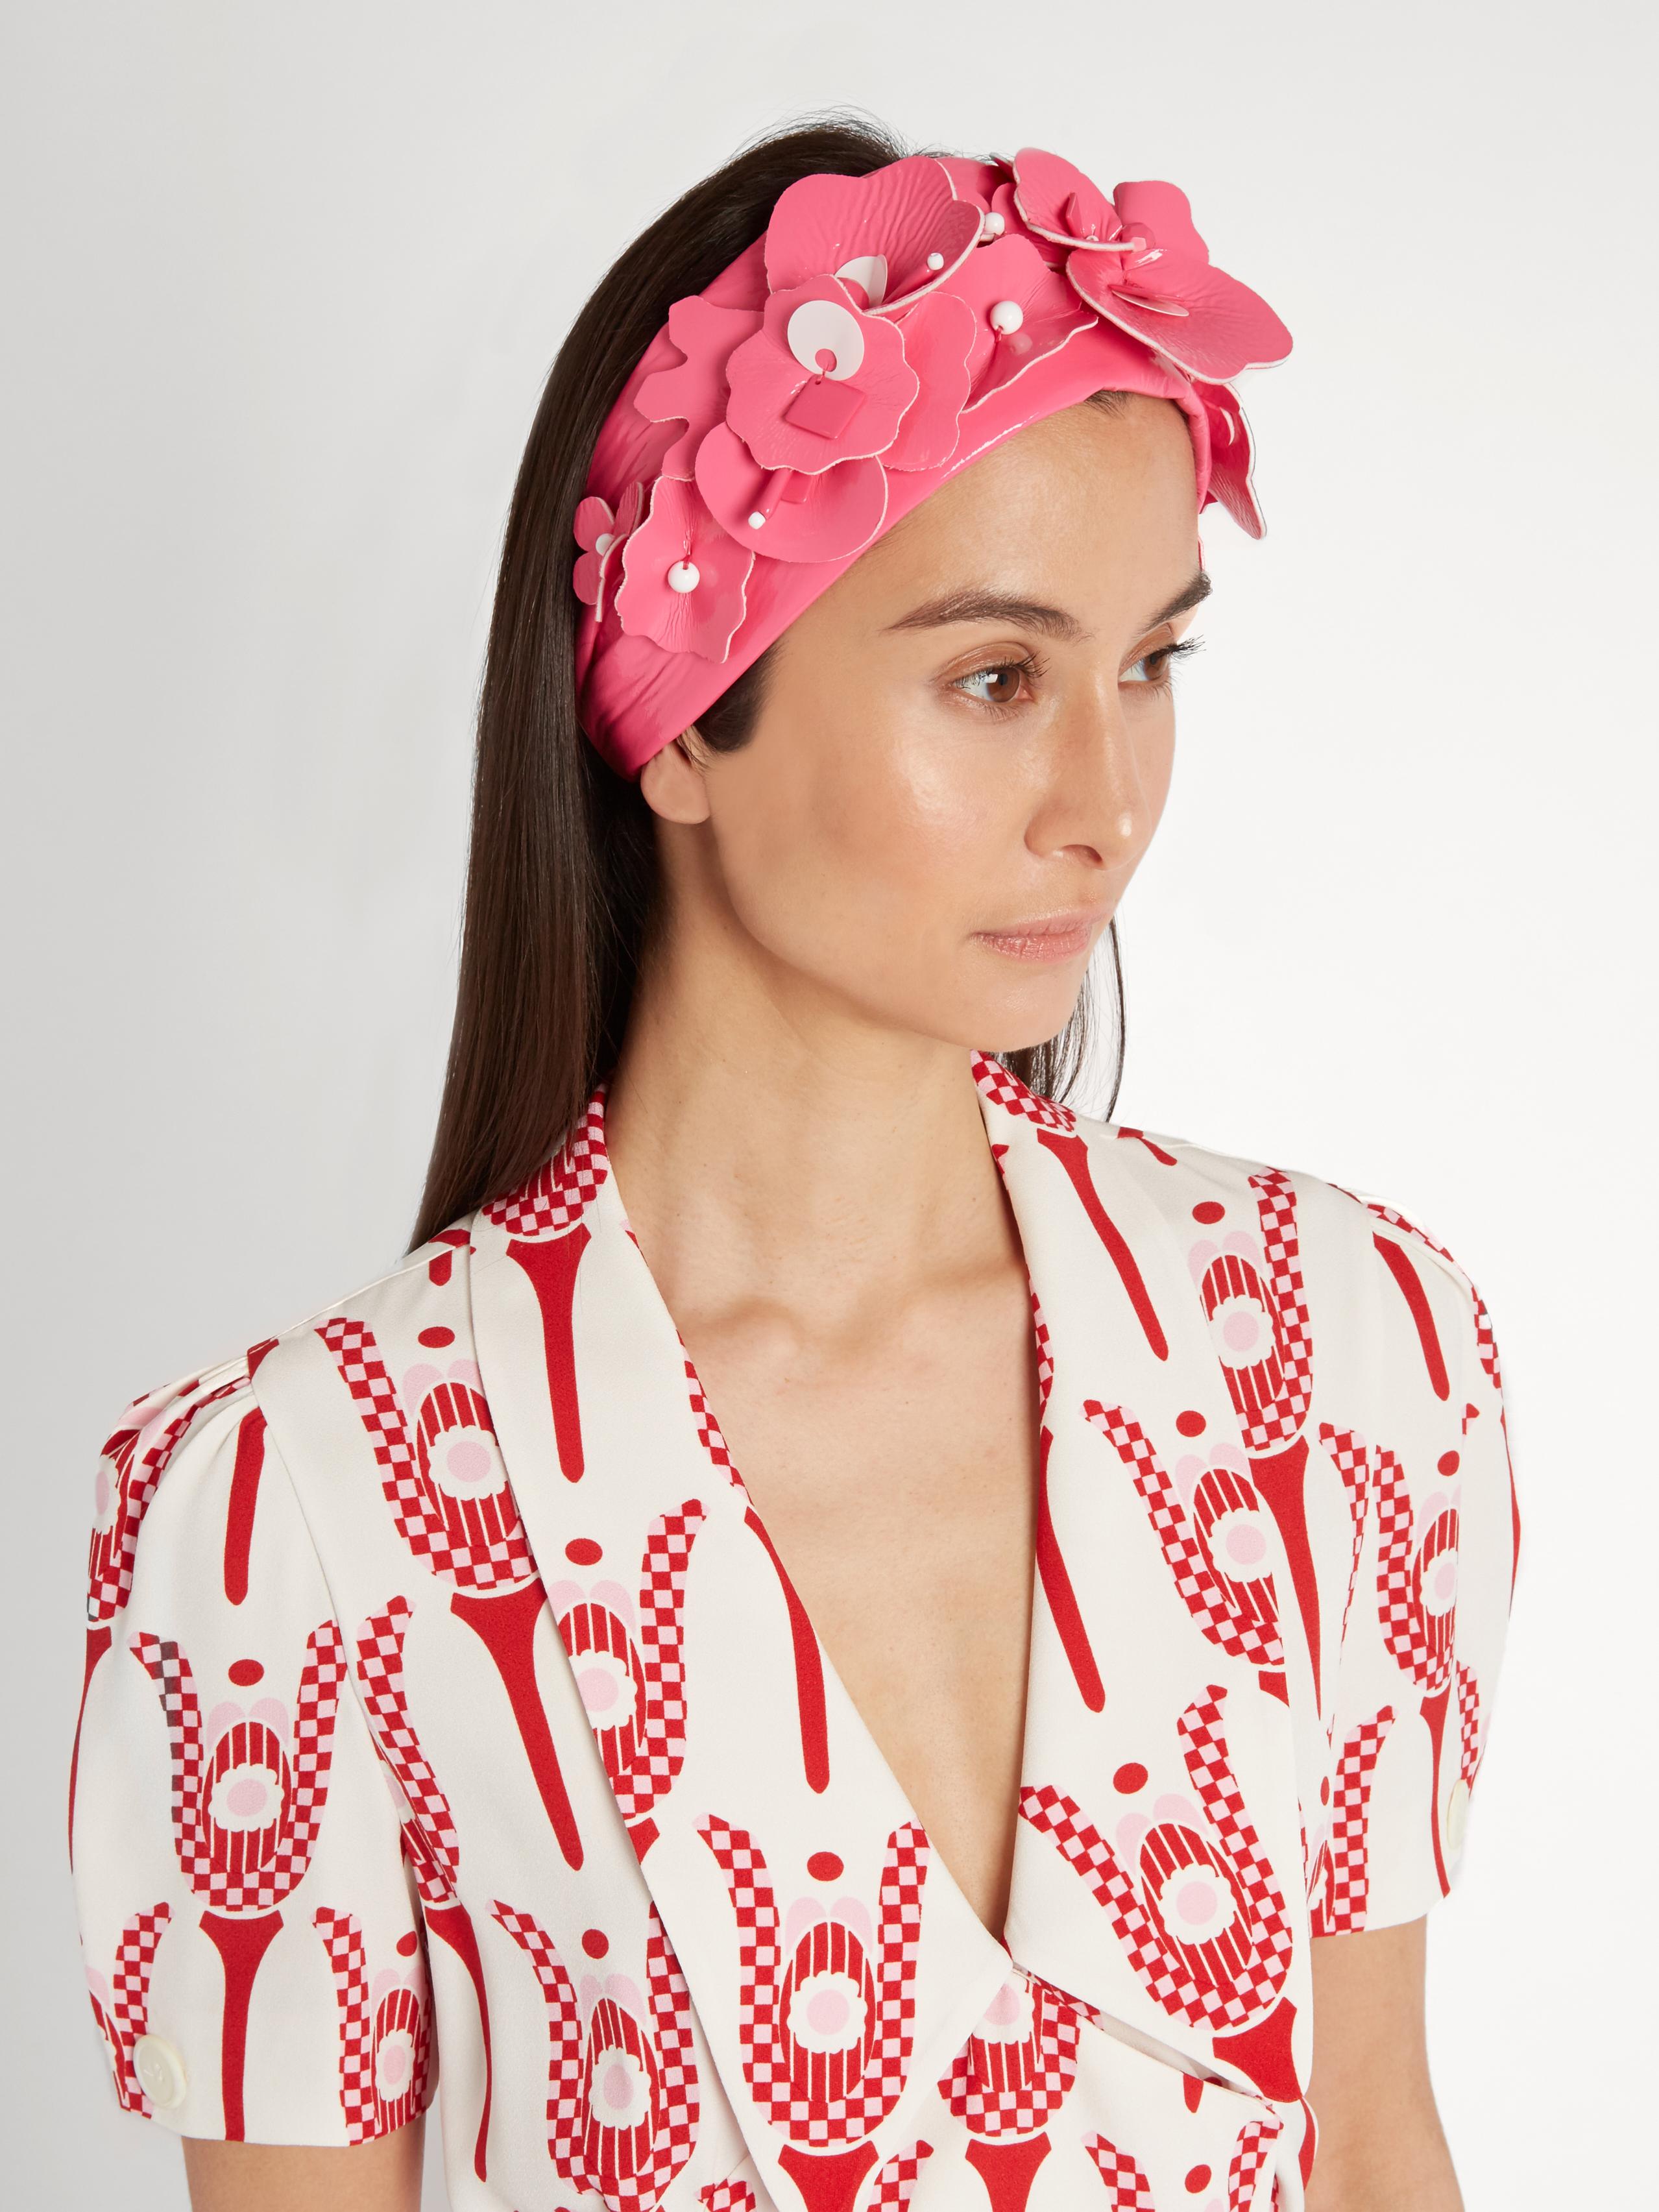 Miu Miu Synthetic Embellished Floral Headband in Pink - Lyst